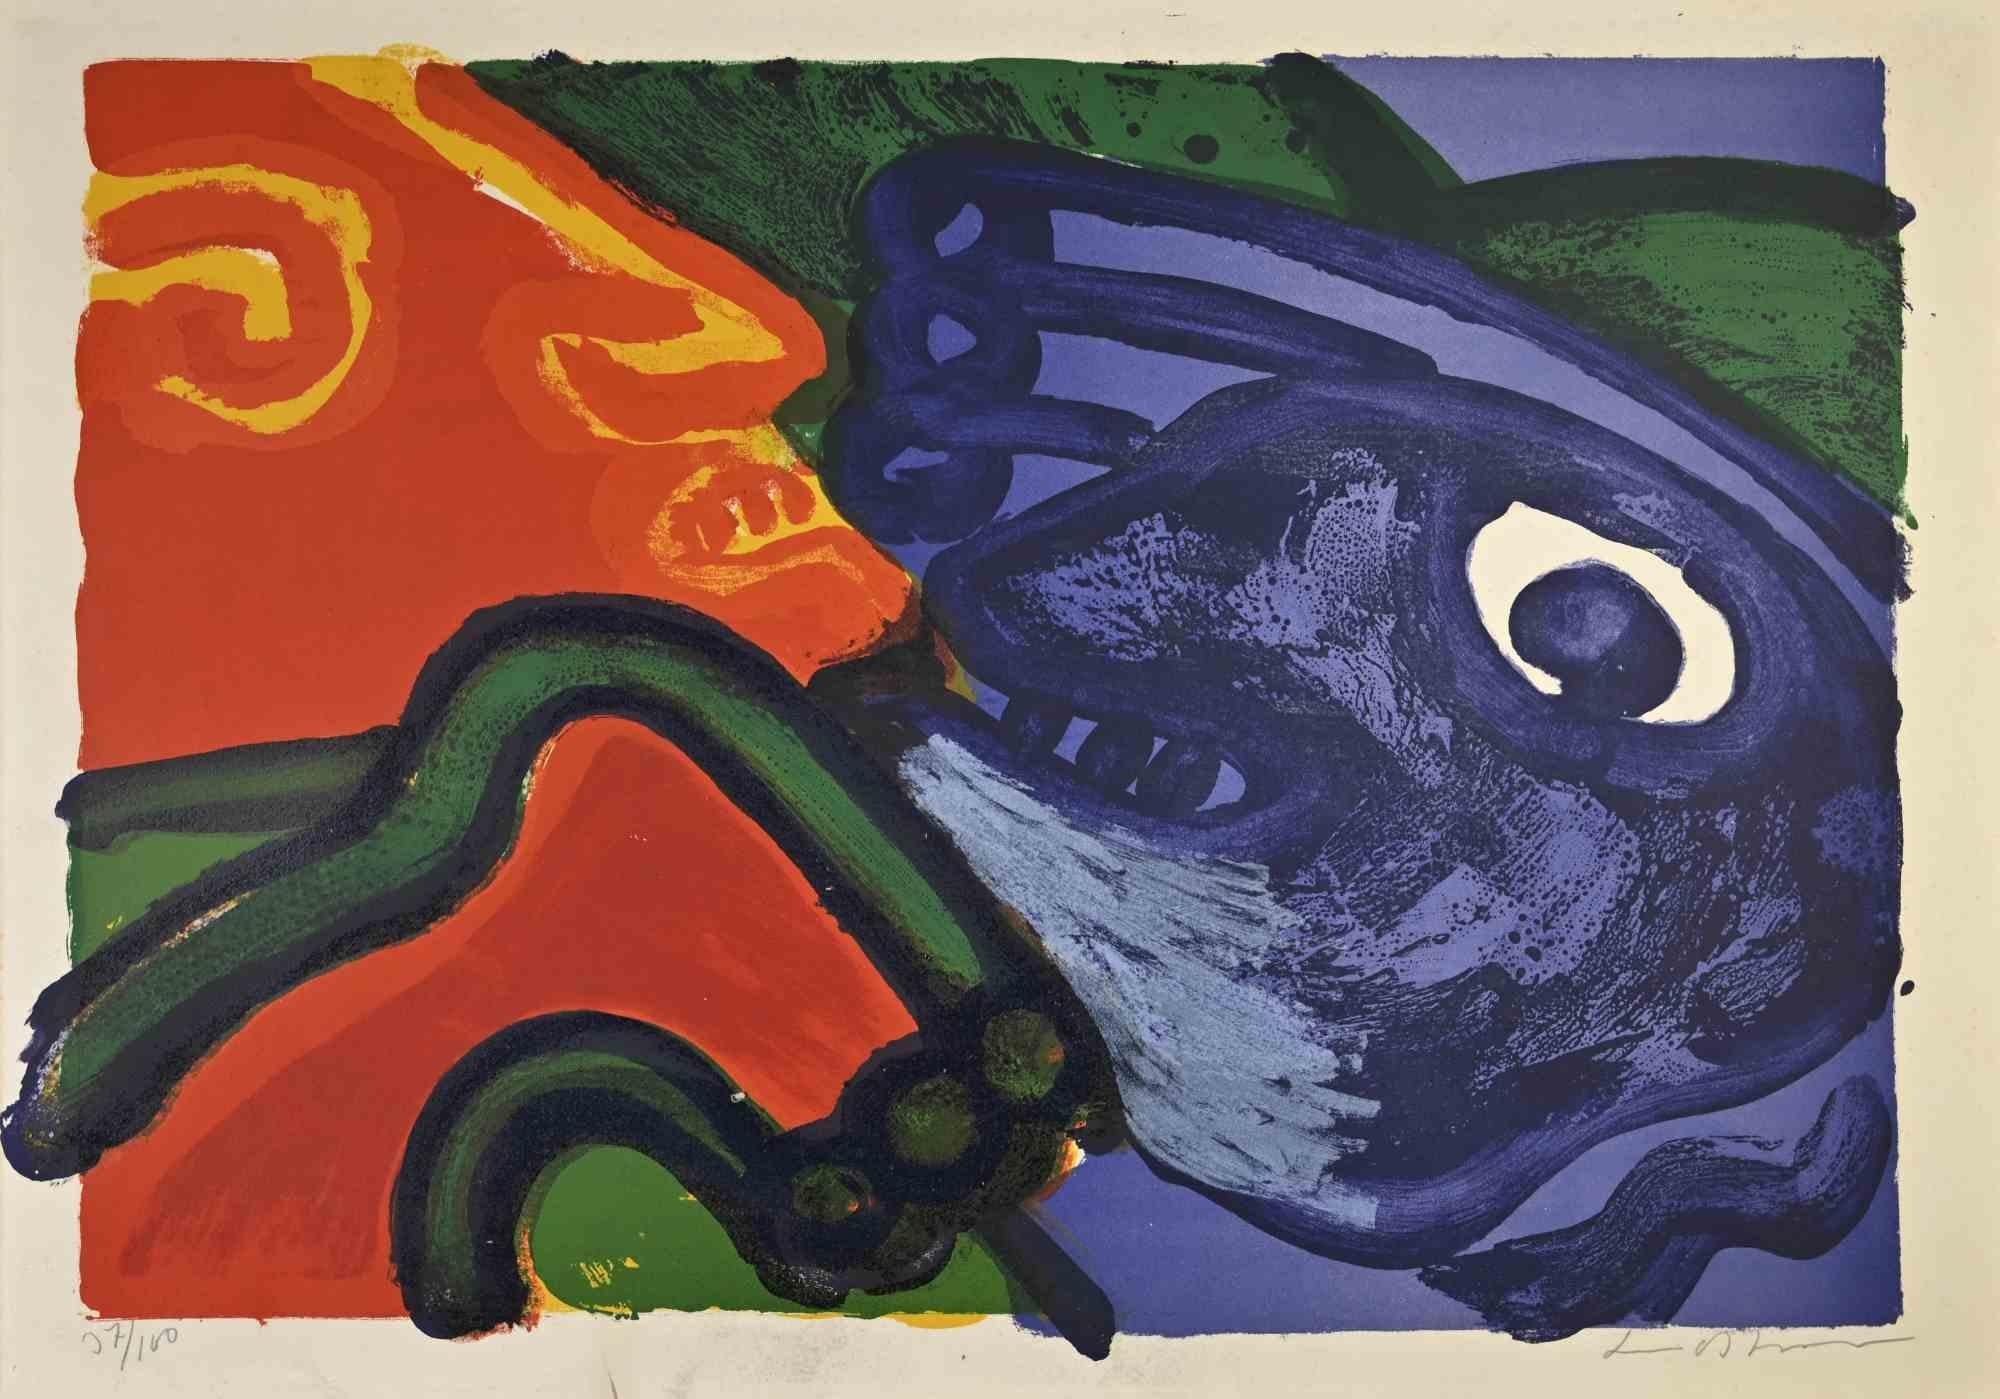 Untitled is an artwork realized by Bengt Lindstrom (1925 - 2008).

Screen Print. Cm 78,00 x 57,00. 7/100.

Hand signed and numbered.

Good conditions



Bengt Lindström was born in Storsjökappel, a small village in Norrland, Sweden, on 3 September